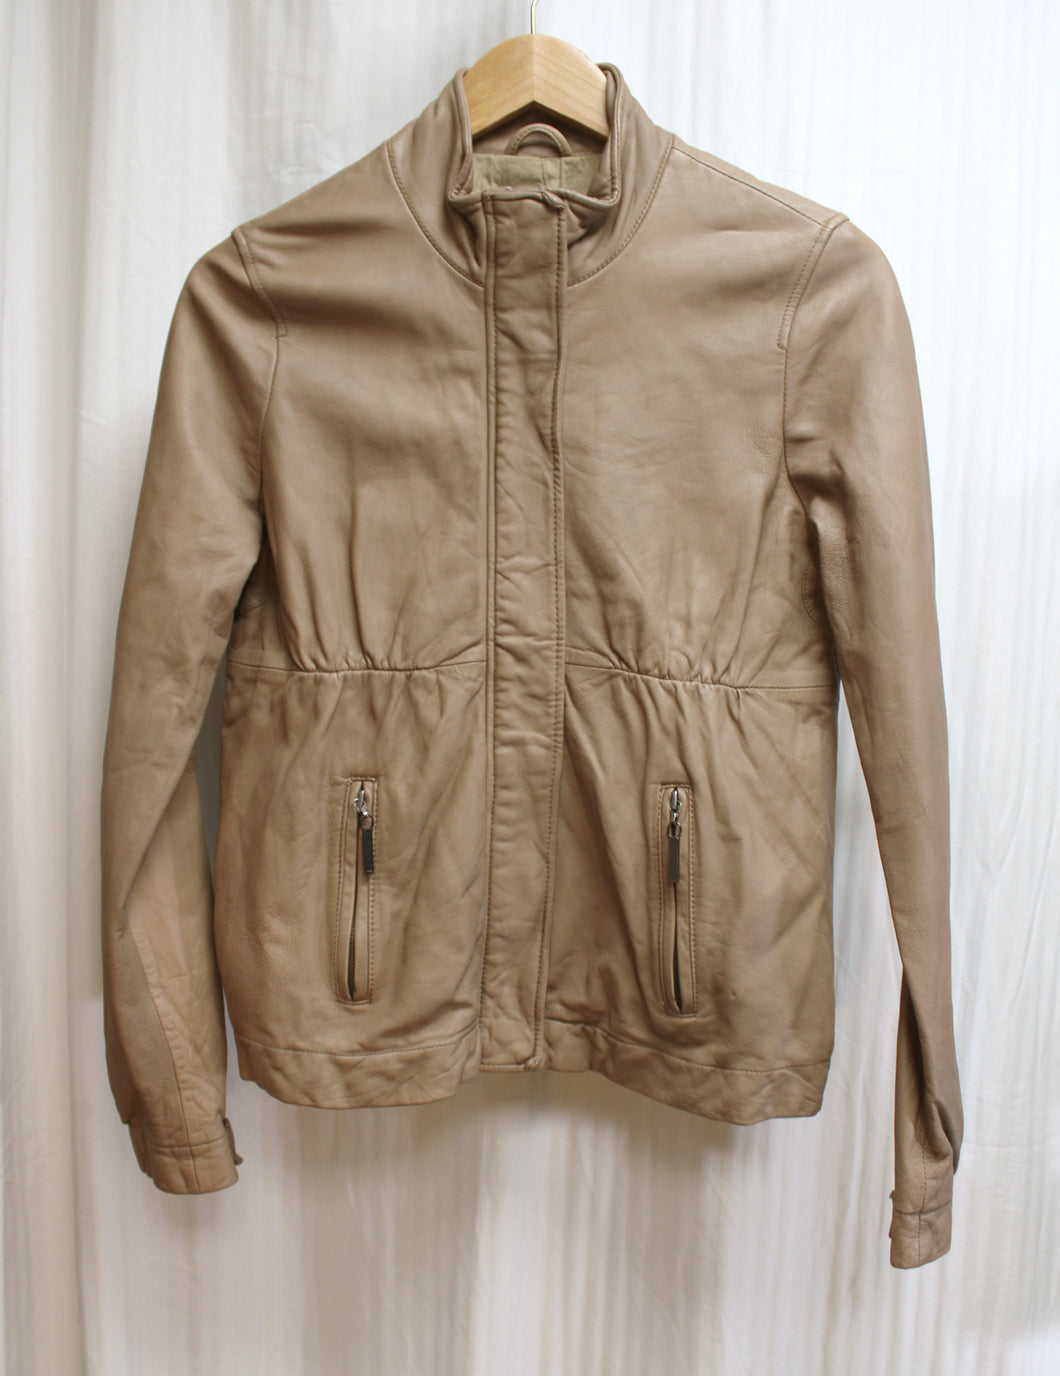 Vince. - Taupe Leather Jacket w/ Snap Placket over Zip - Size S